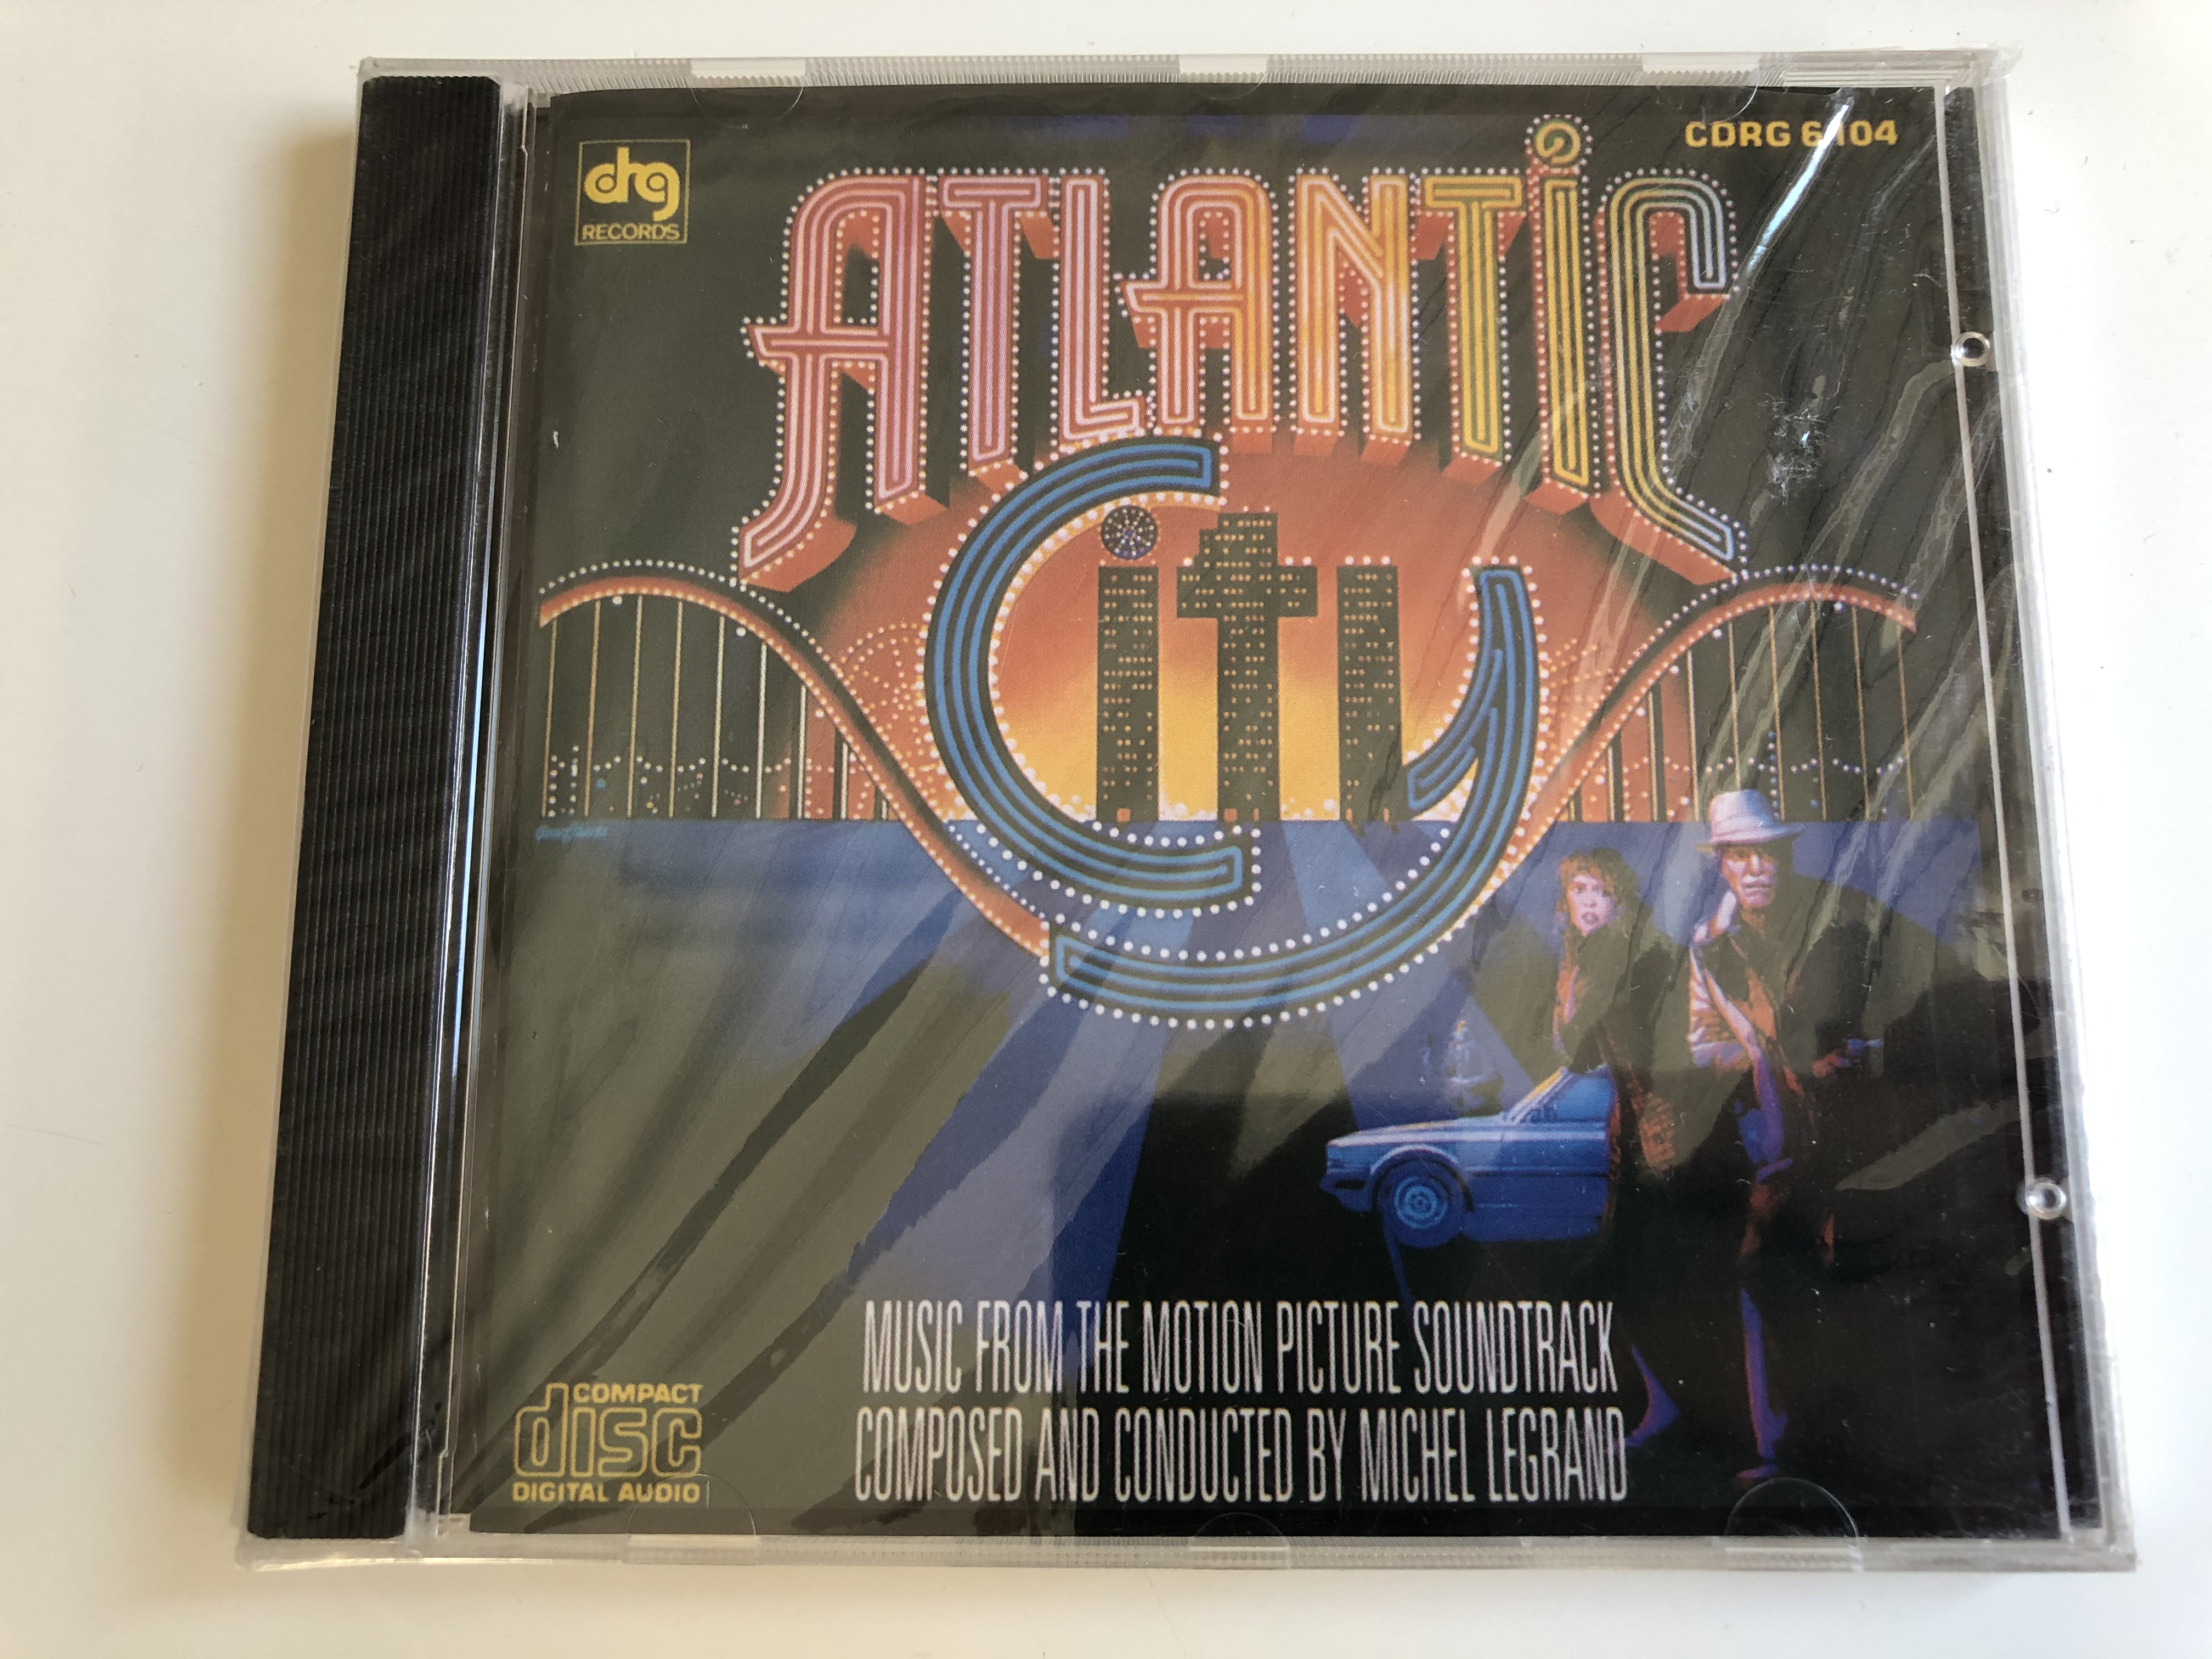 atlantic-city-music-from-the-motion-picture-soundtrack-composed-by-michel-legrand-drg-records-audio-cd-cdrg-6104-1-.jpg